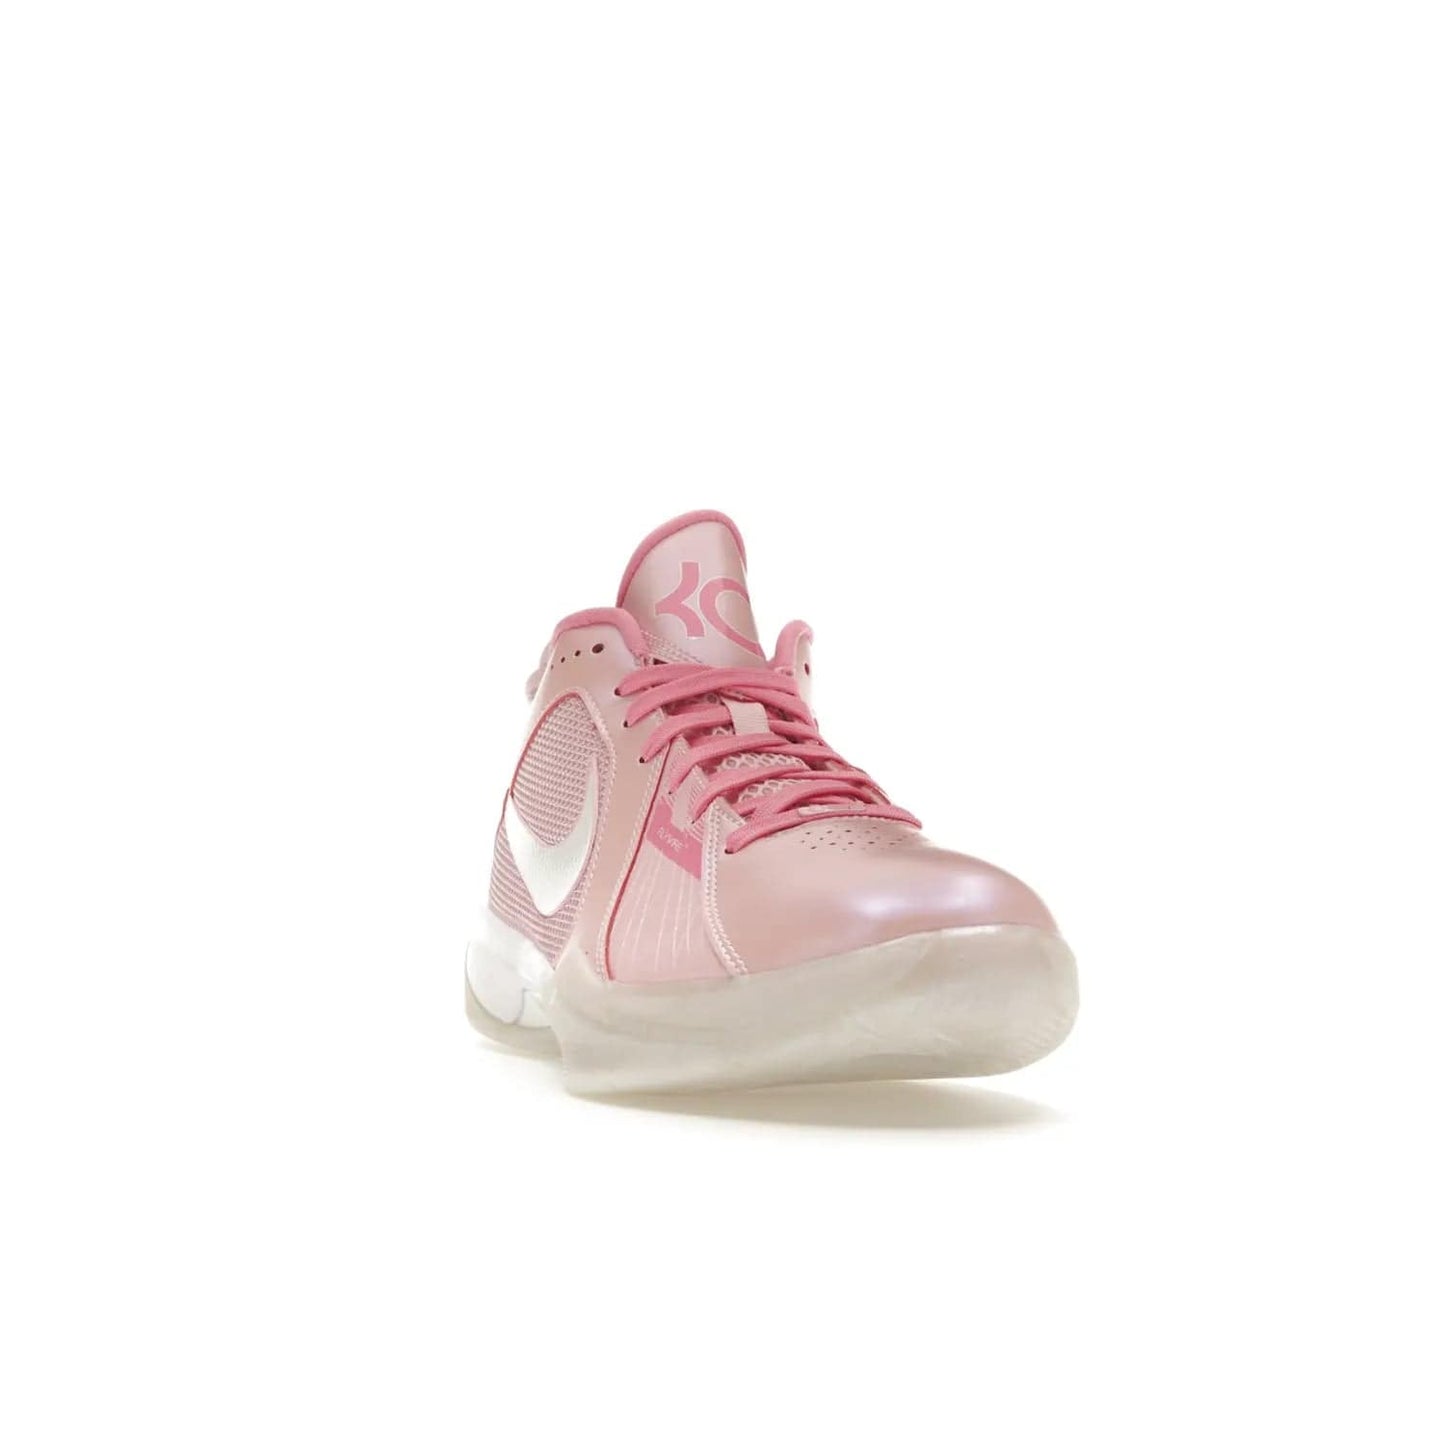 Nike KD 3 Aunt Pearl - Image 8 - Only at www.BallersClubKickz.com - Introducing the Nike KD 3 Aunt Pearl. Featuring a bold Medium Soft Pink, White, & Lotus Pink colorway. Get ready to stand out this October 15th.